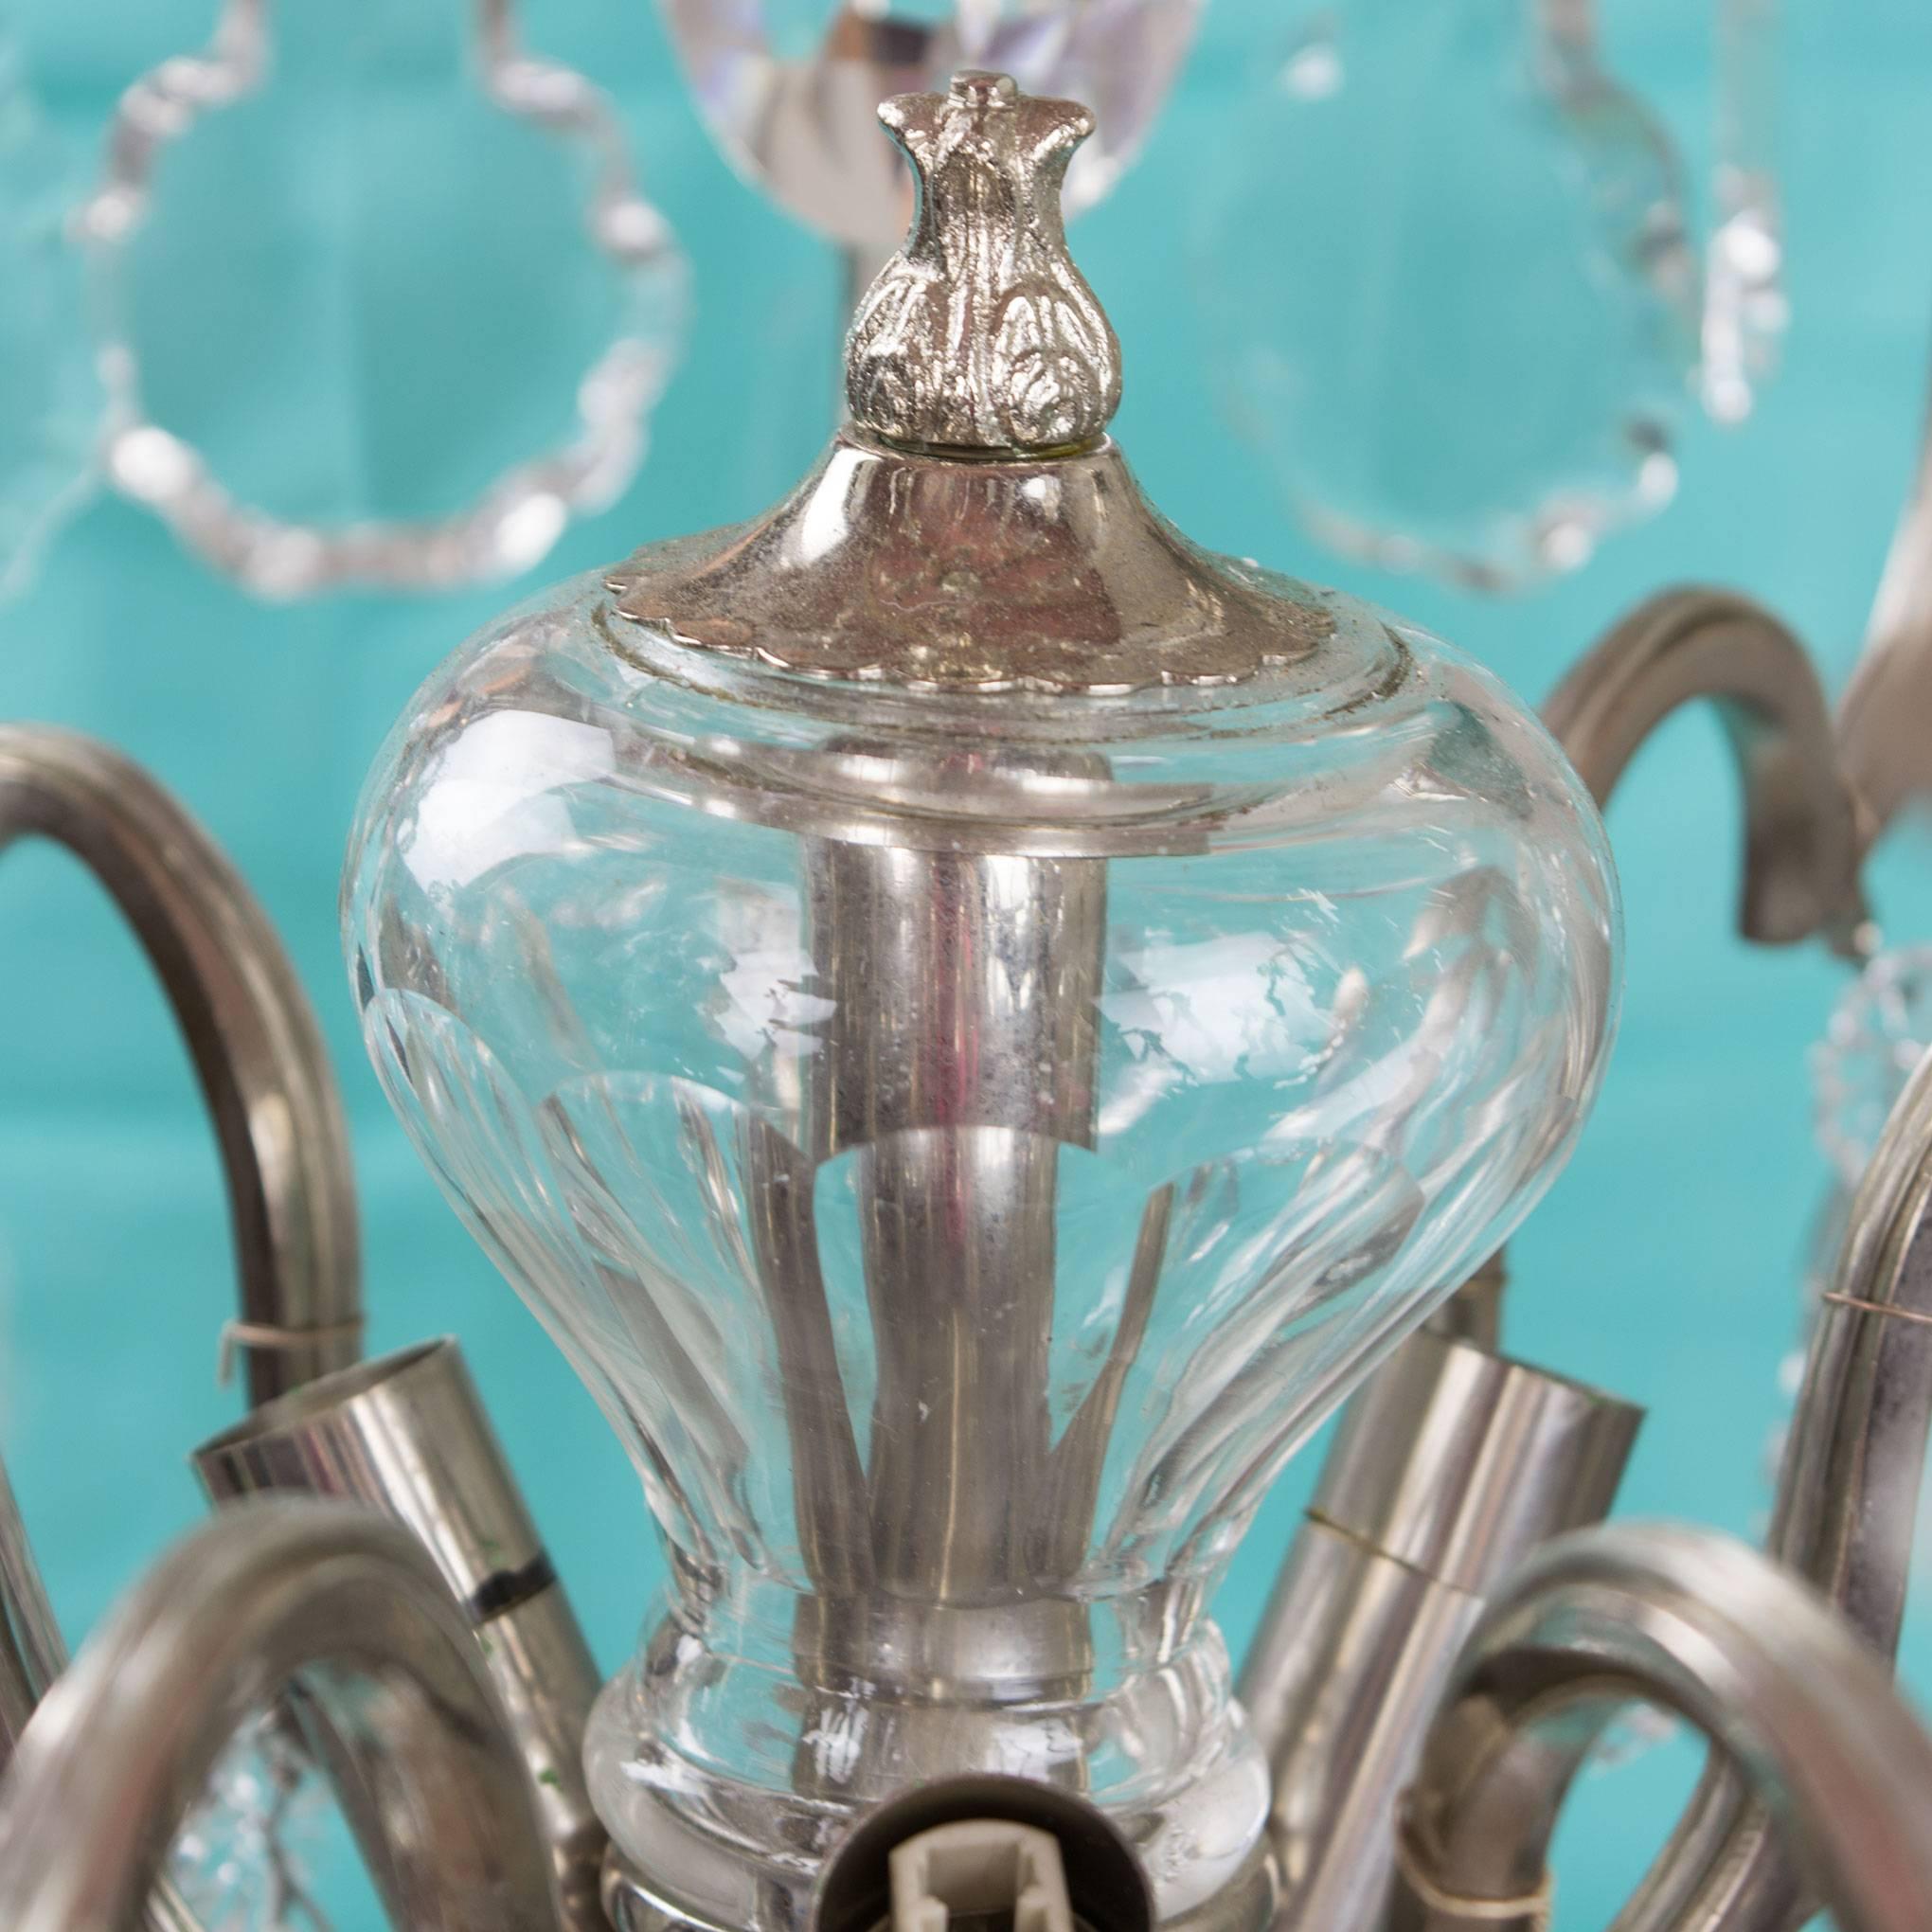 19th Century Nine-Light Crystal Chandelier Six-Light Arms Three Inner Lights In Good Condition For Sale In Pataskala, OH